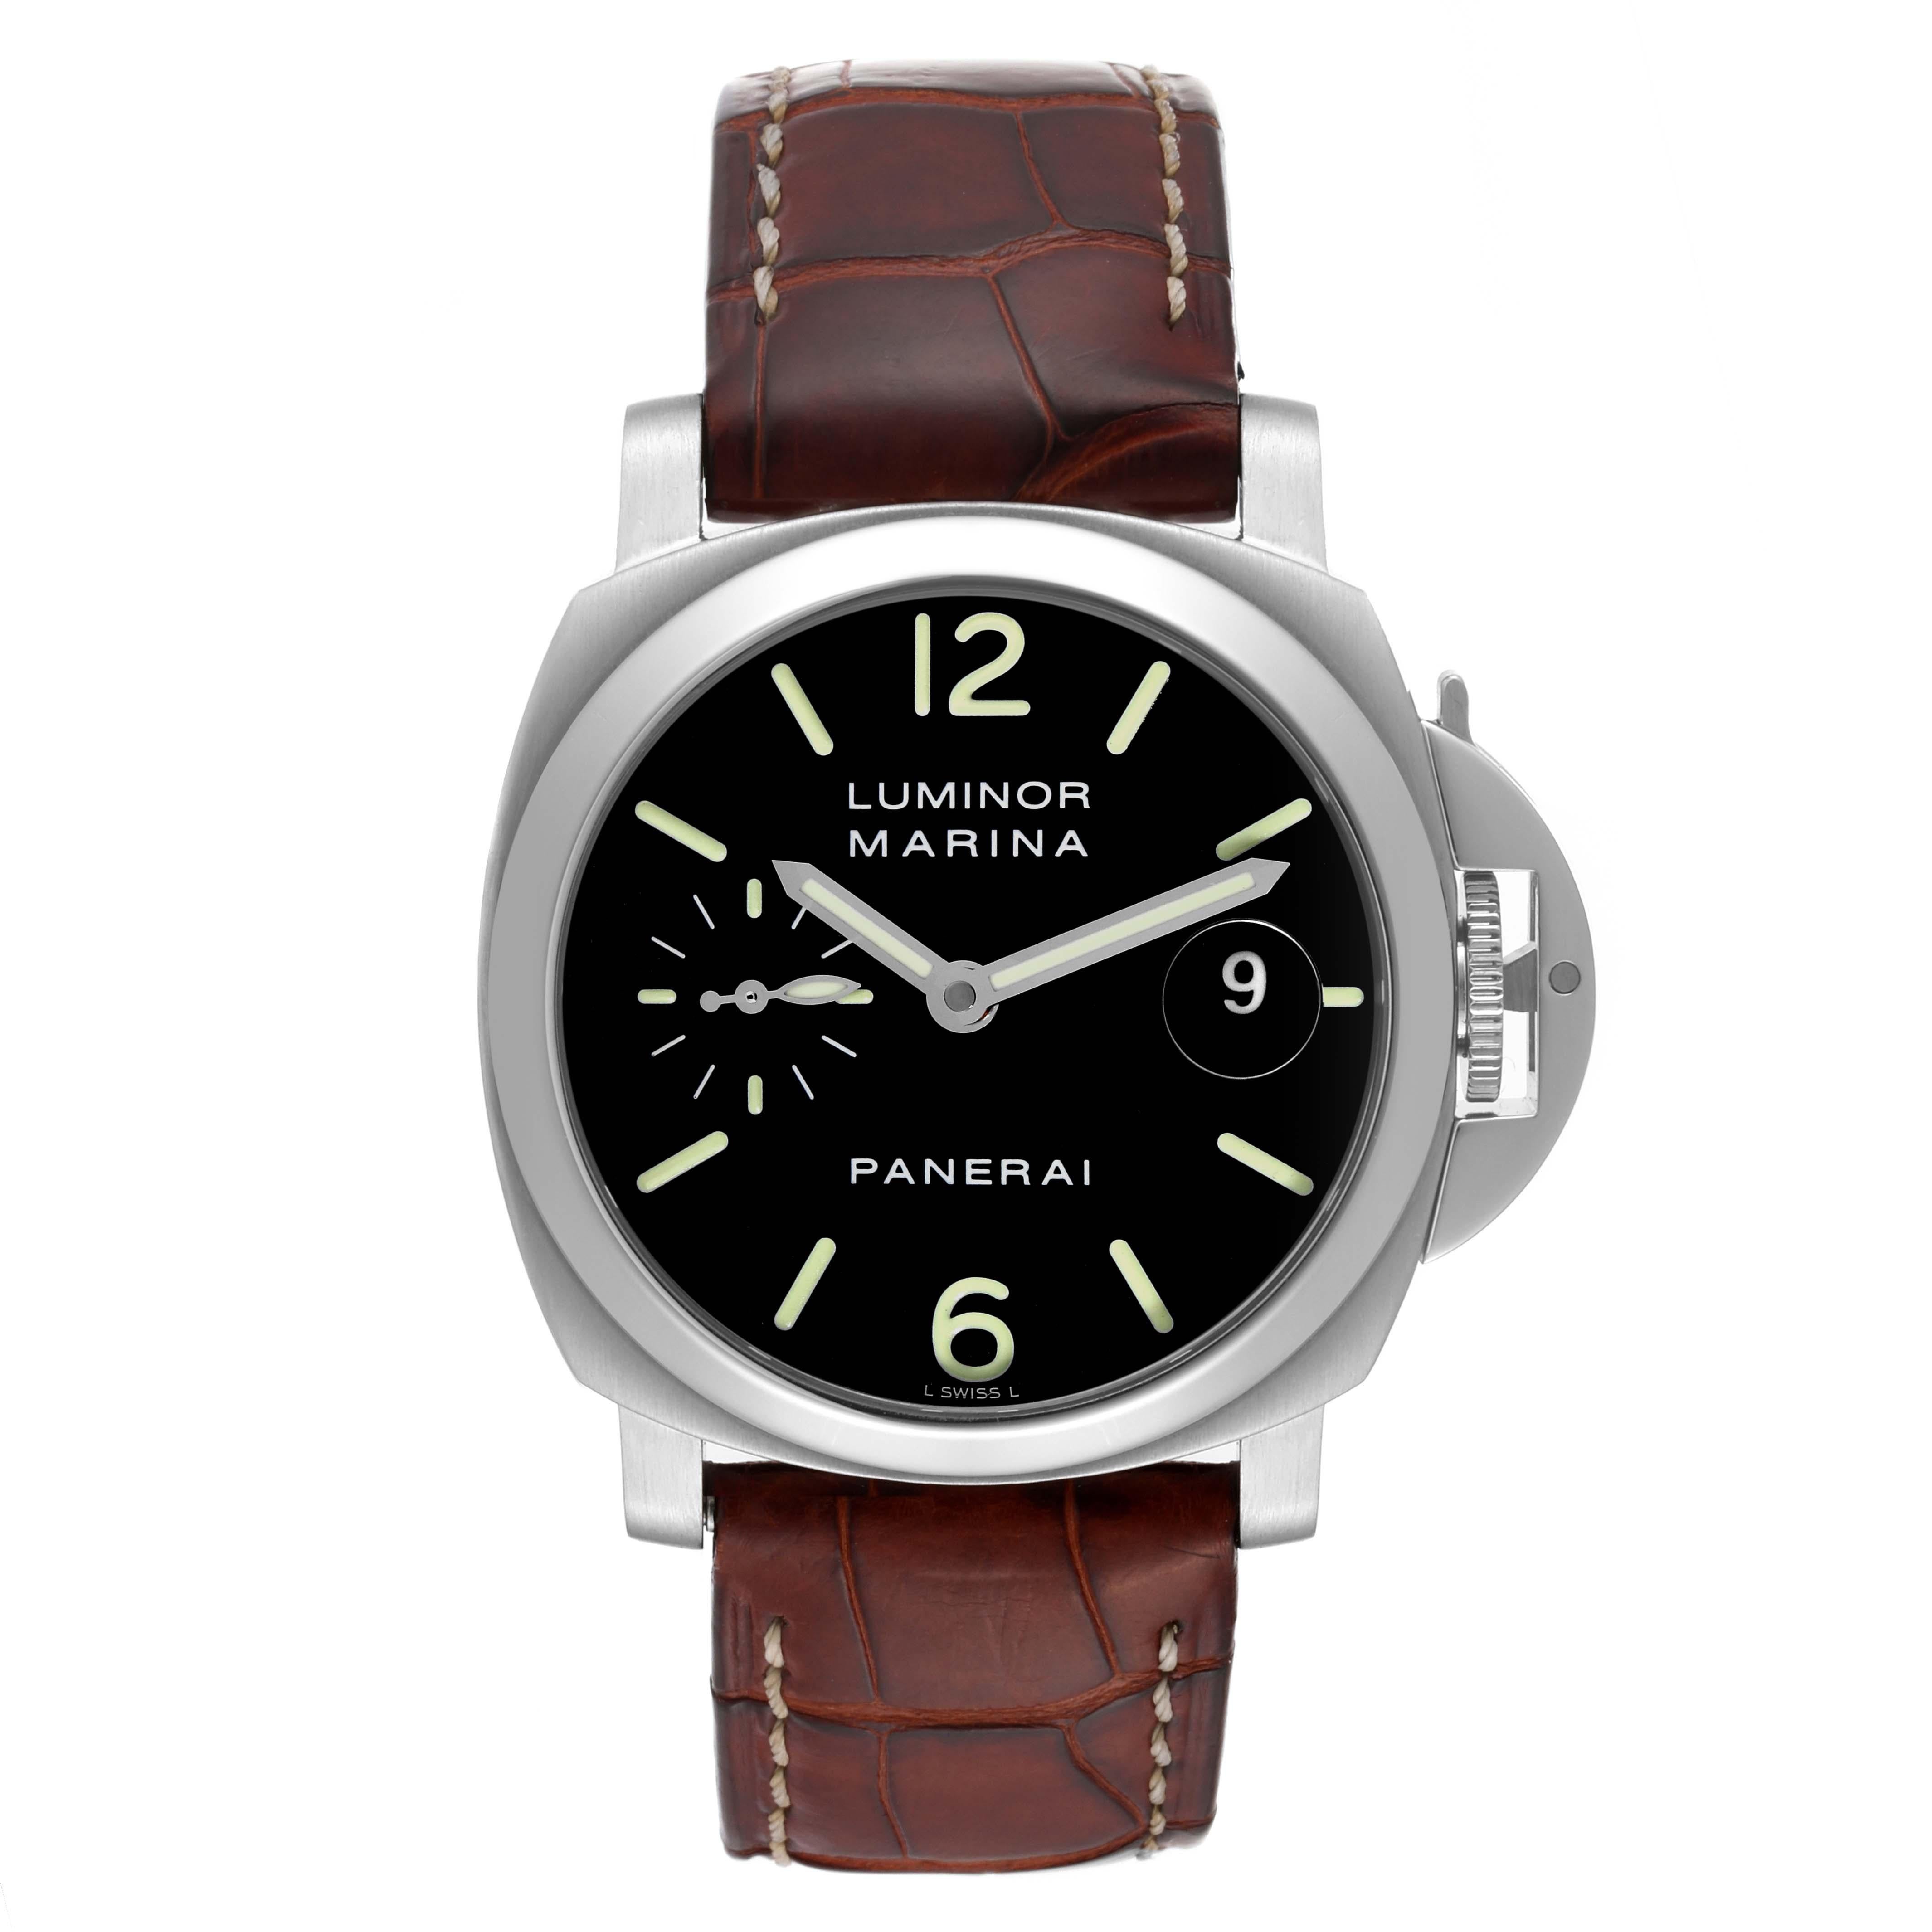 Panerai Luminor Marina Automatic Steel Mens Watch PAM00048. Automatic self-winding movement. Stainless steel cushion case 40.0 mm in diameter. Polished stainless steel Panerai patented crown protector. Polished stainless steel bezel. Scratch